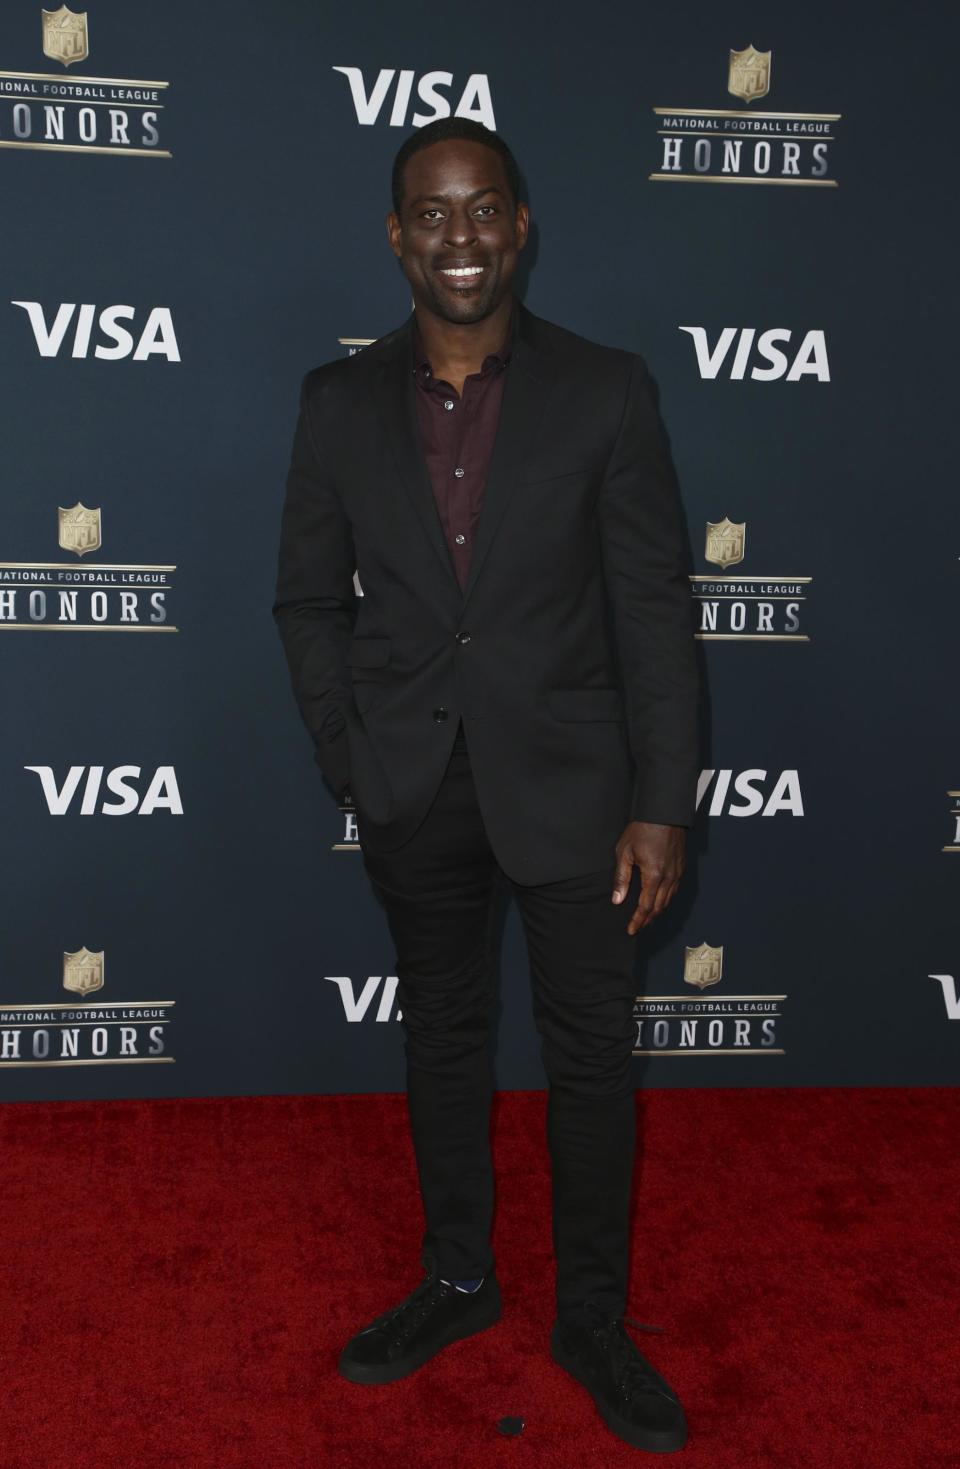 Sterling K. Brown arrives at the 6th annual NFL Honors at the Wortham Center on Saturday, Feb. 4, 2017, in Houston. (Photo by John Salangsang/Invision for NFL via AP)